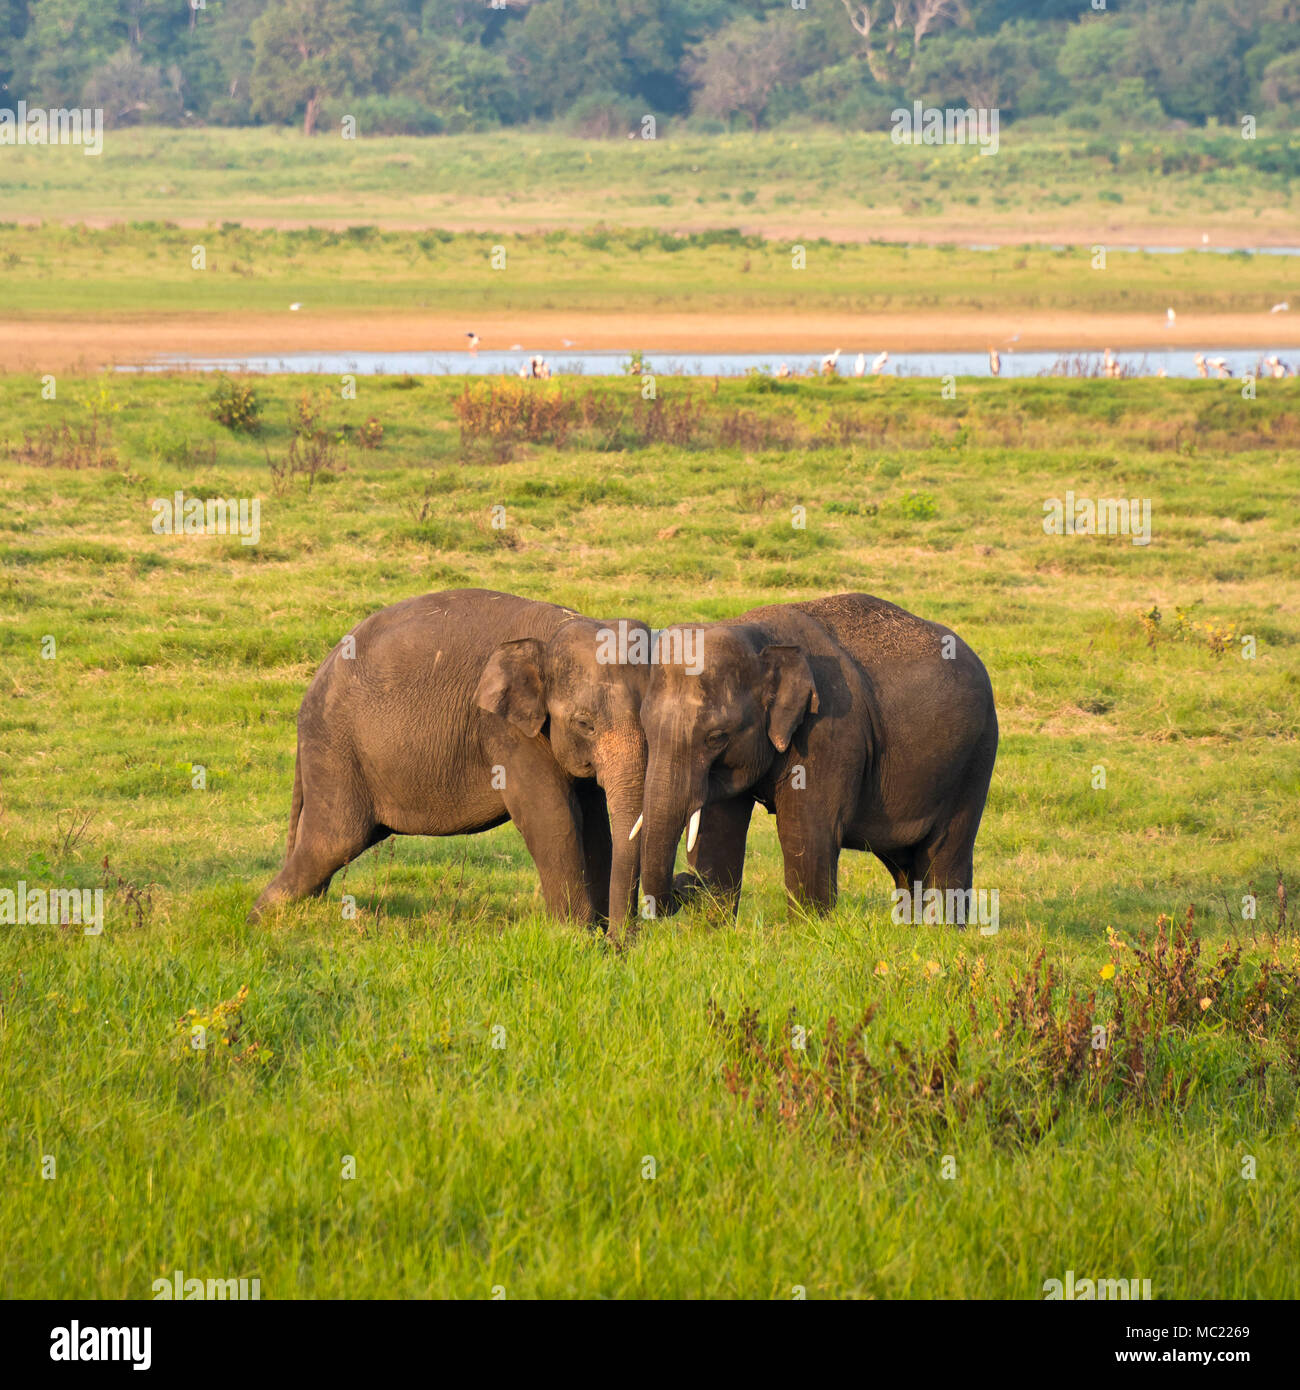 Square view of wild elephants rubbing against each other at Minneriya National Park in Sri Lanka. Stock Photo